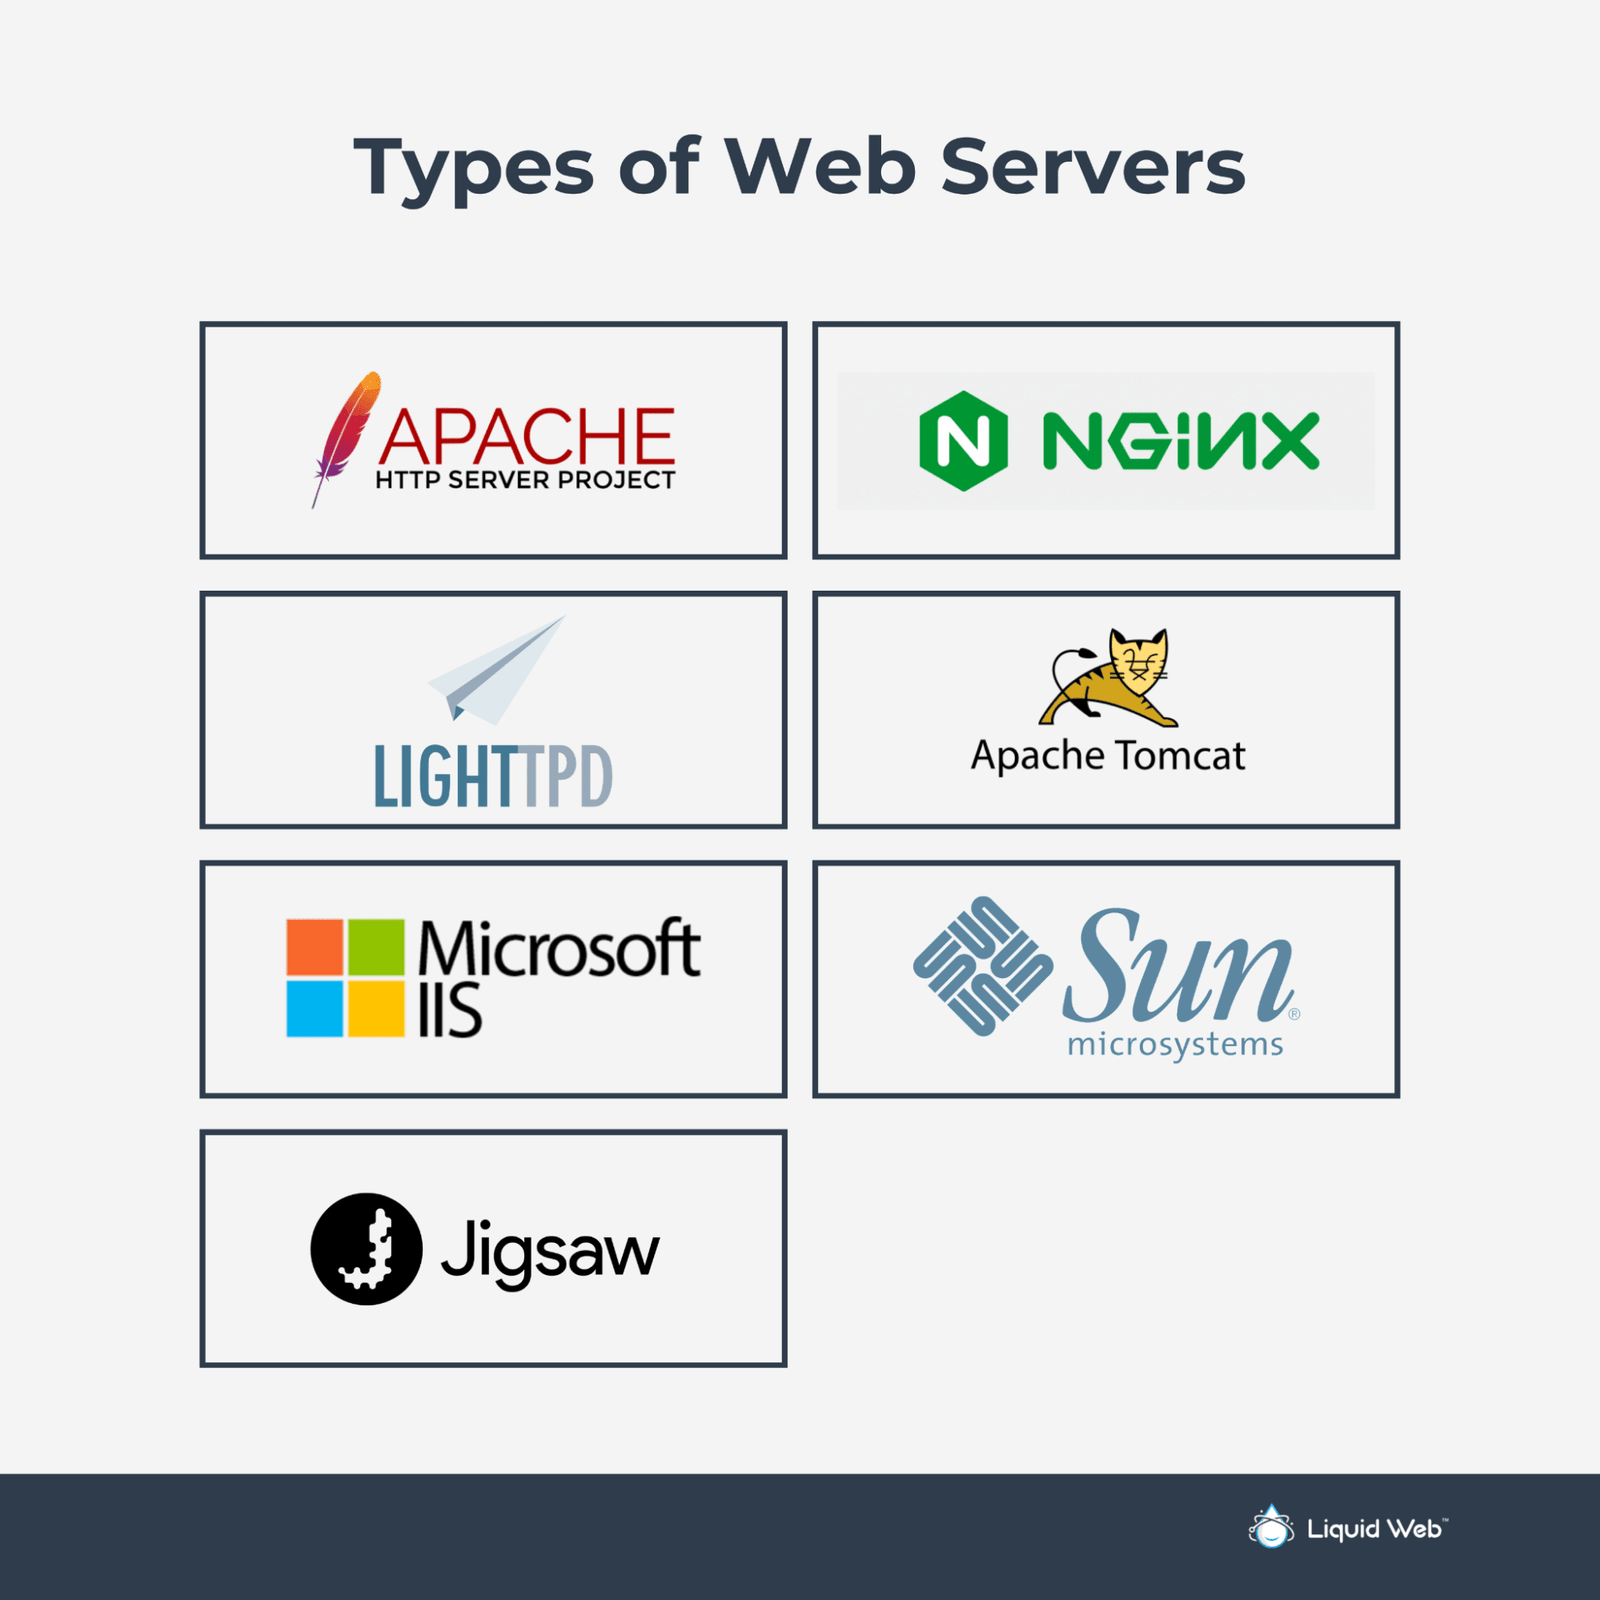 Icons representing different types of web servers